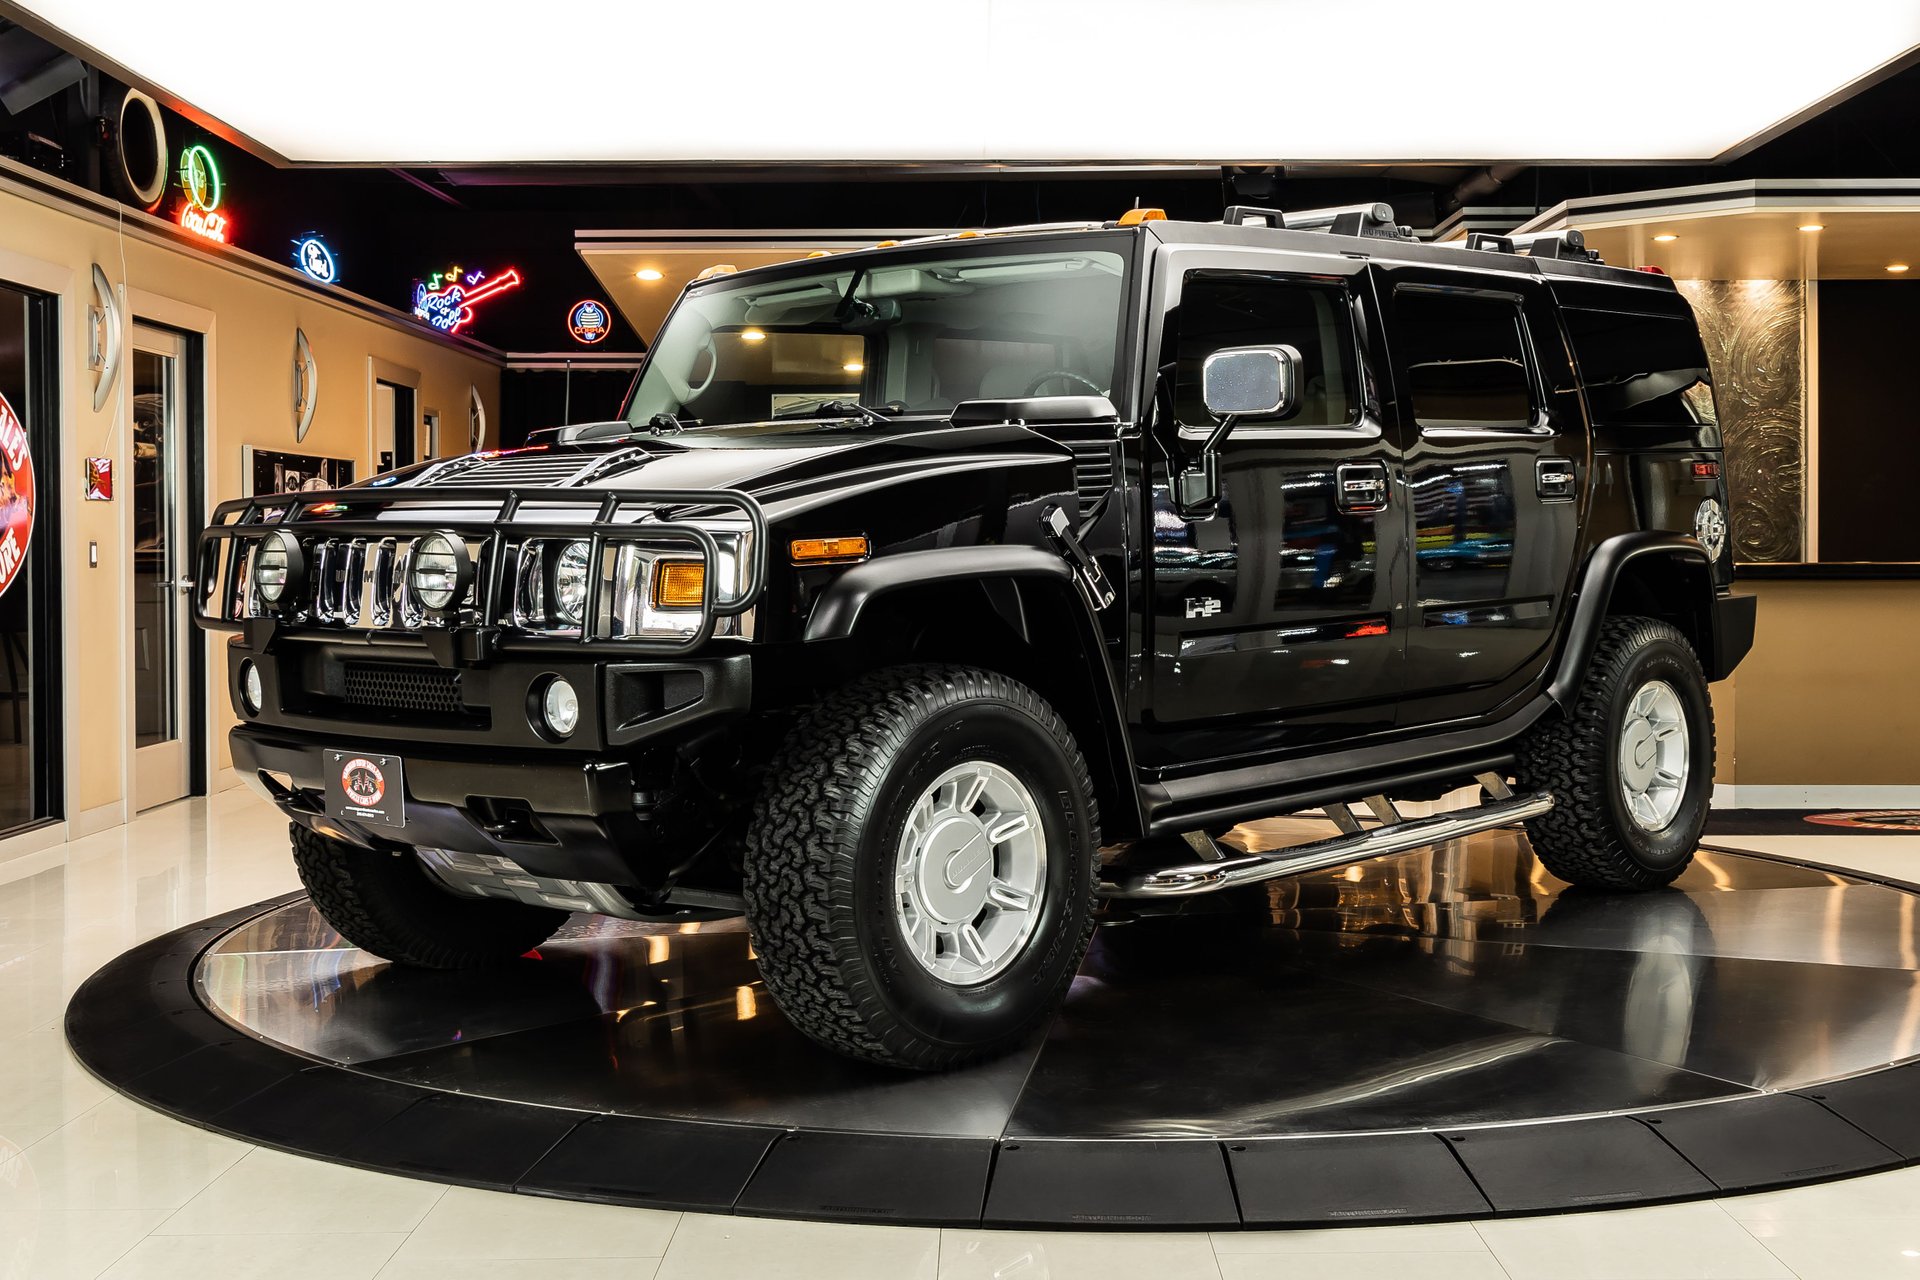 2004 Hummer H2 | Classic Cars for Sale Michigan: Muscle & Old Cars |  Vanguard Motor Sales